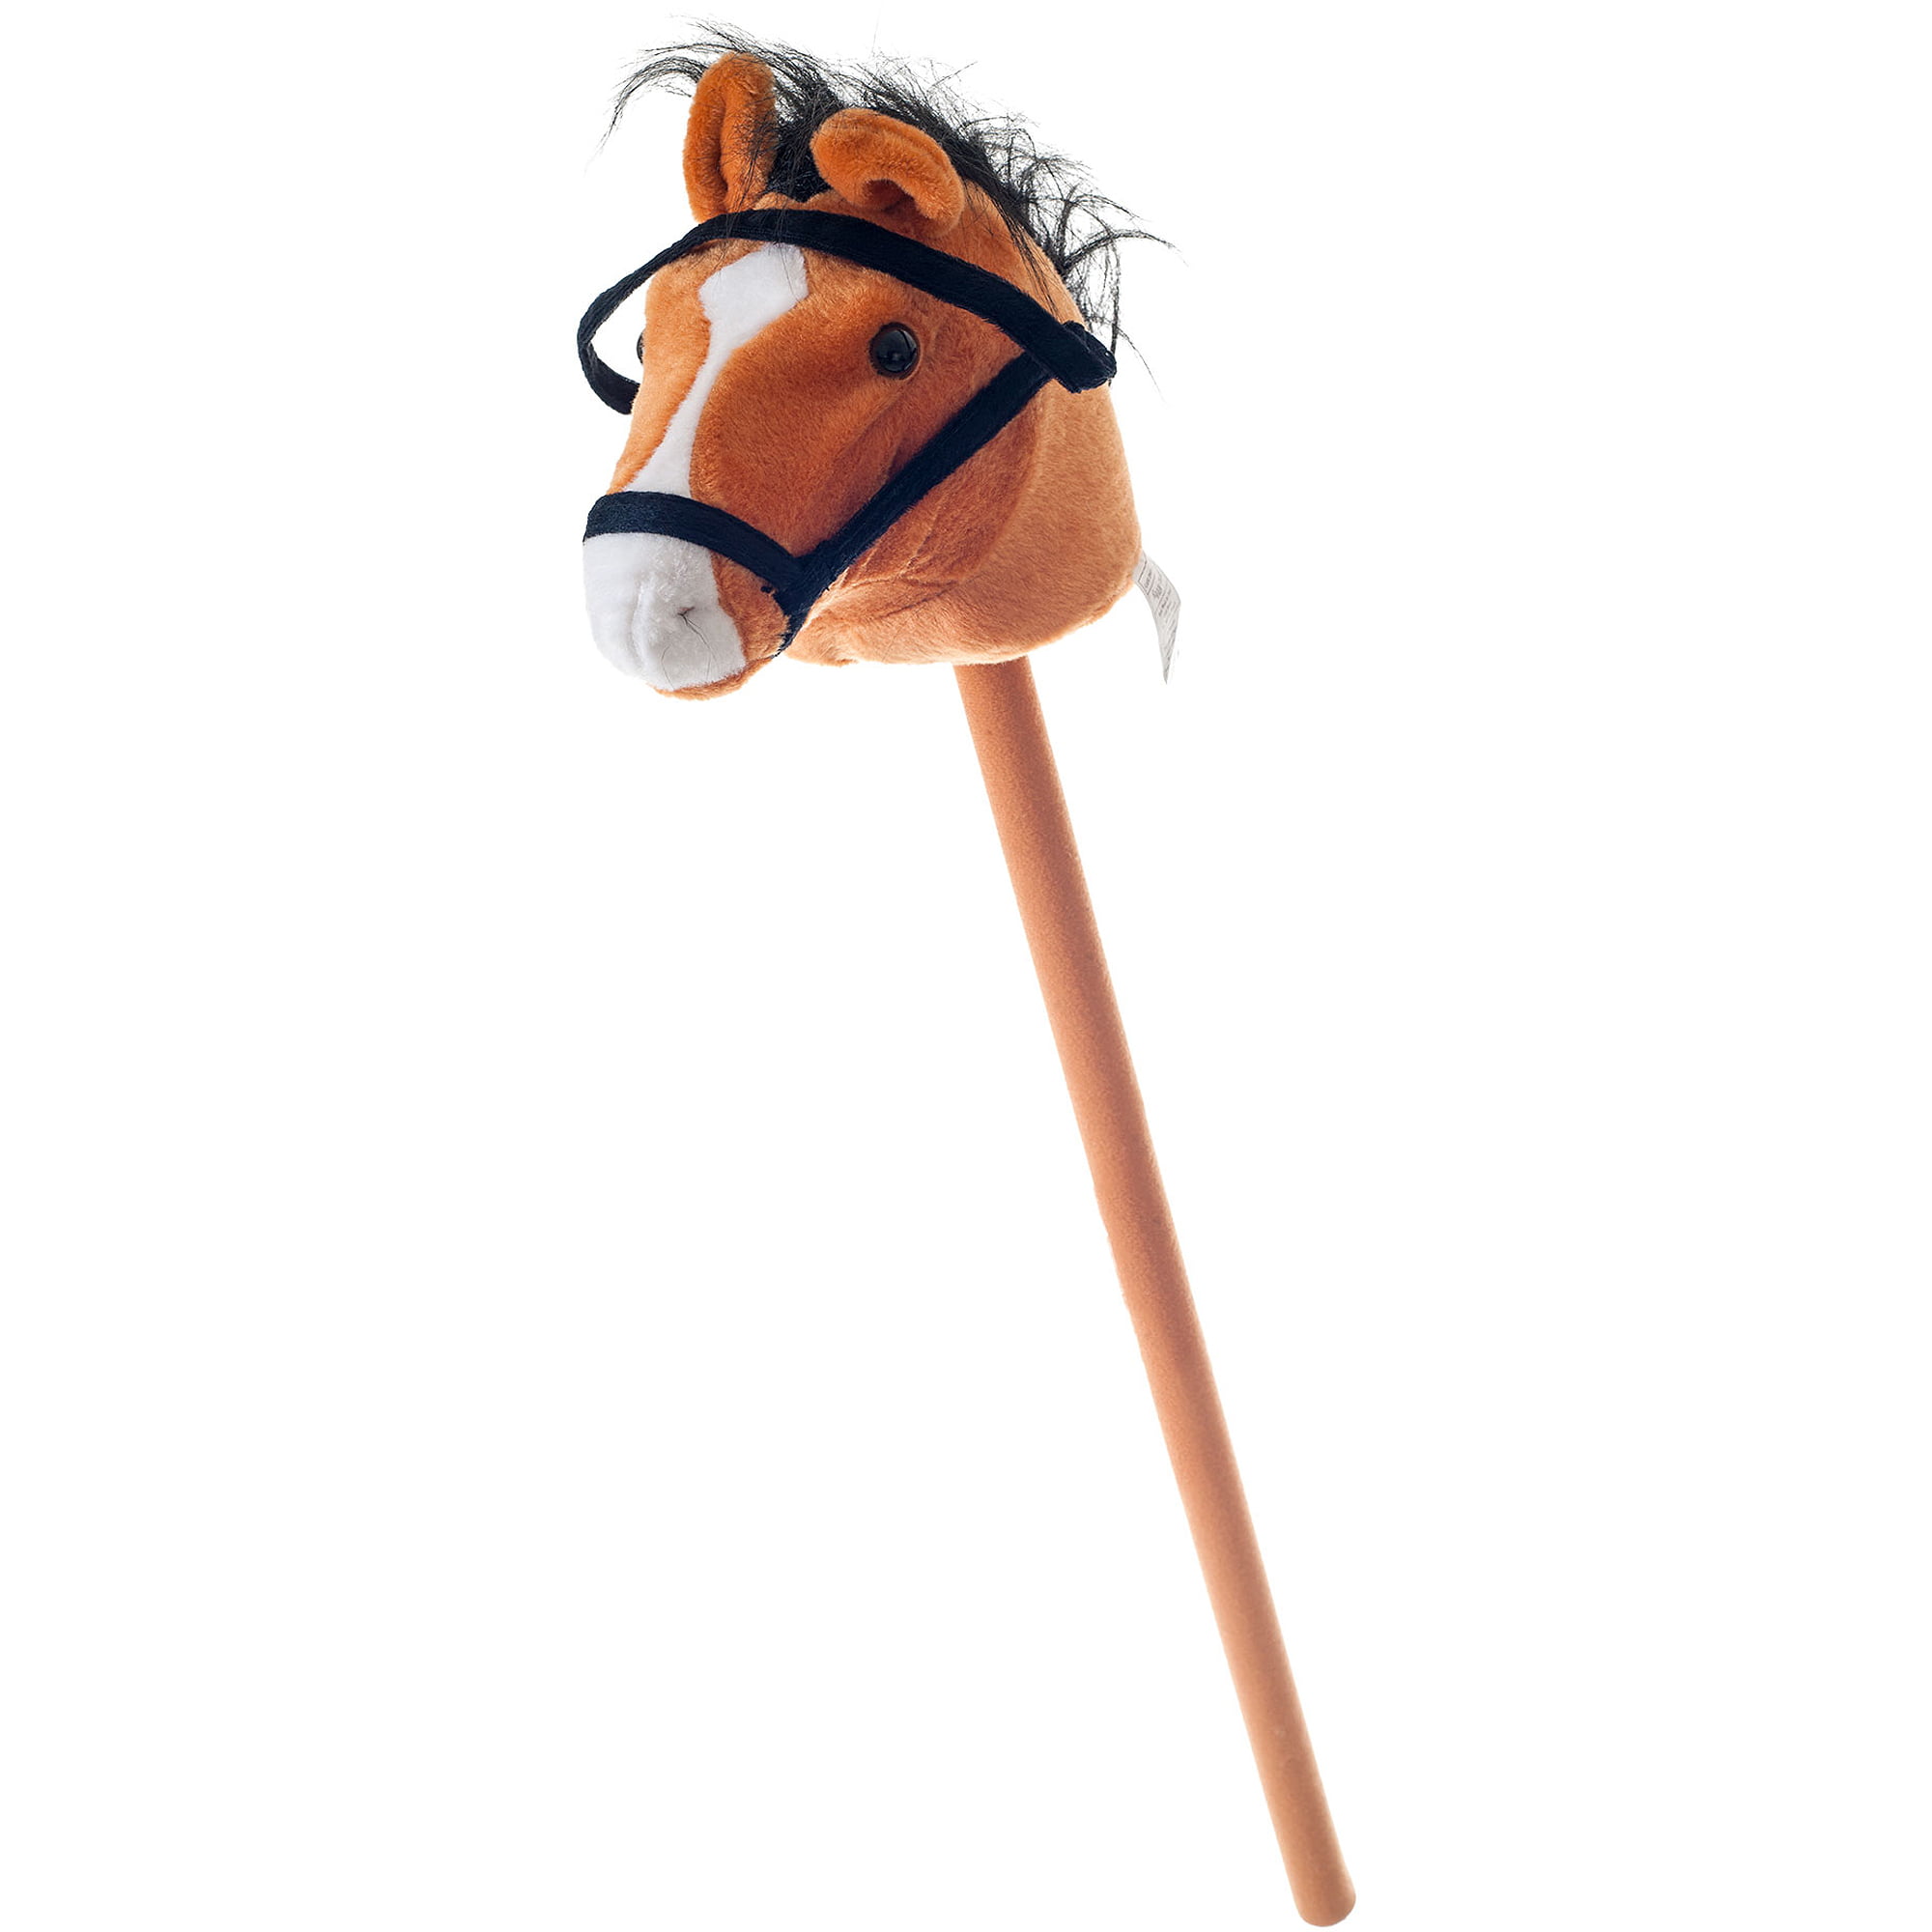 horse riding toy stick